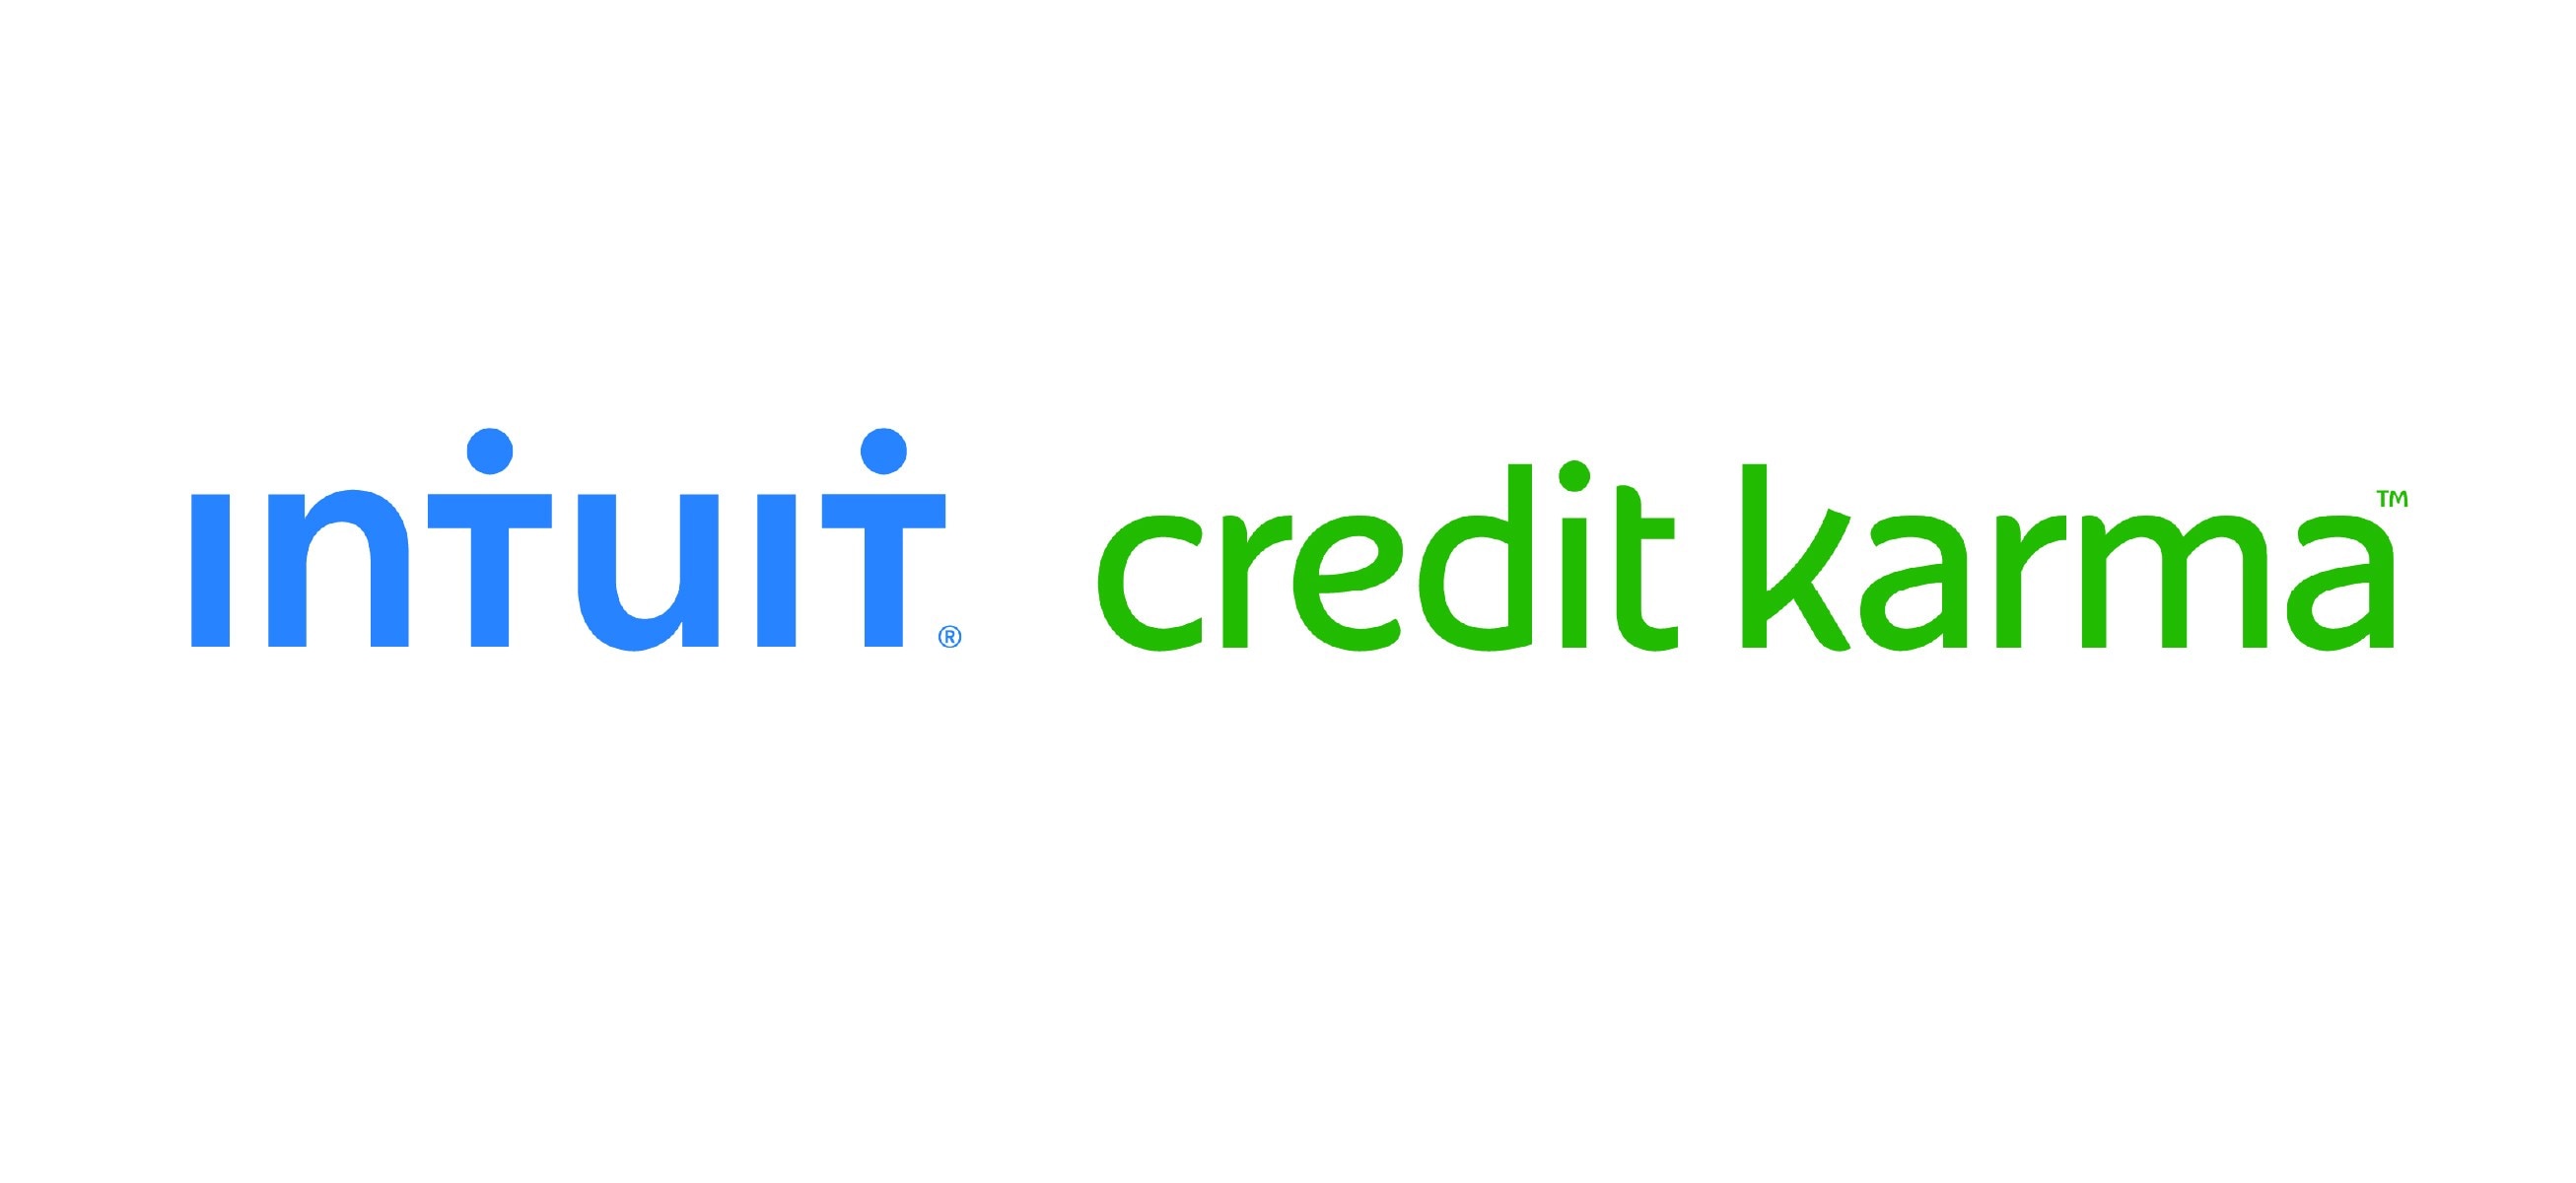 Intuit Completes Acquisition of Credit Karma